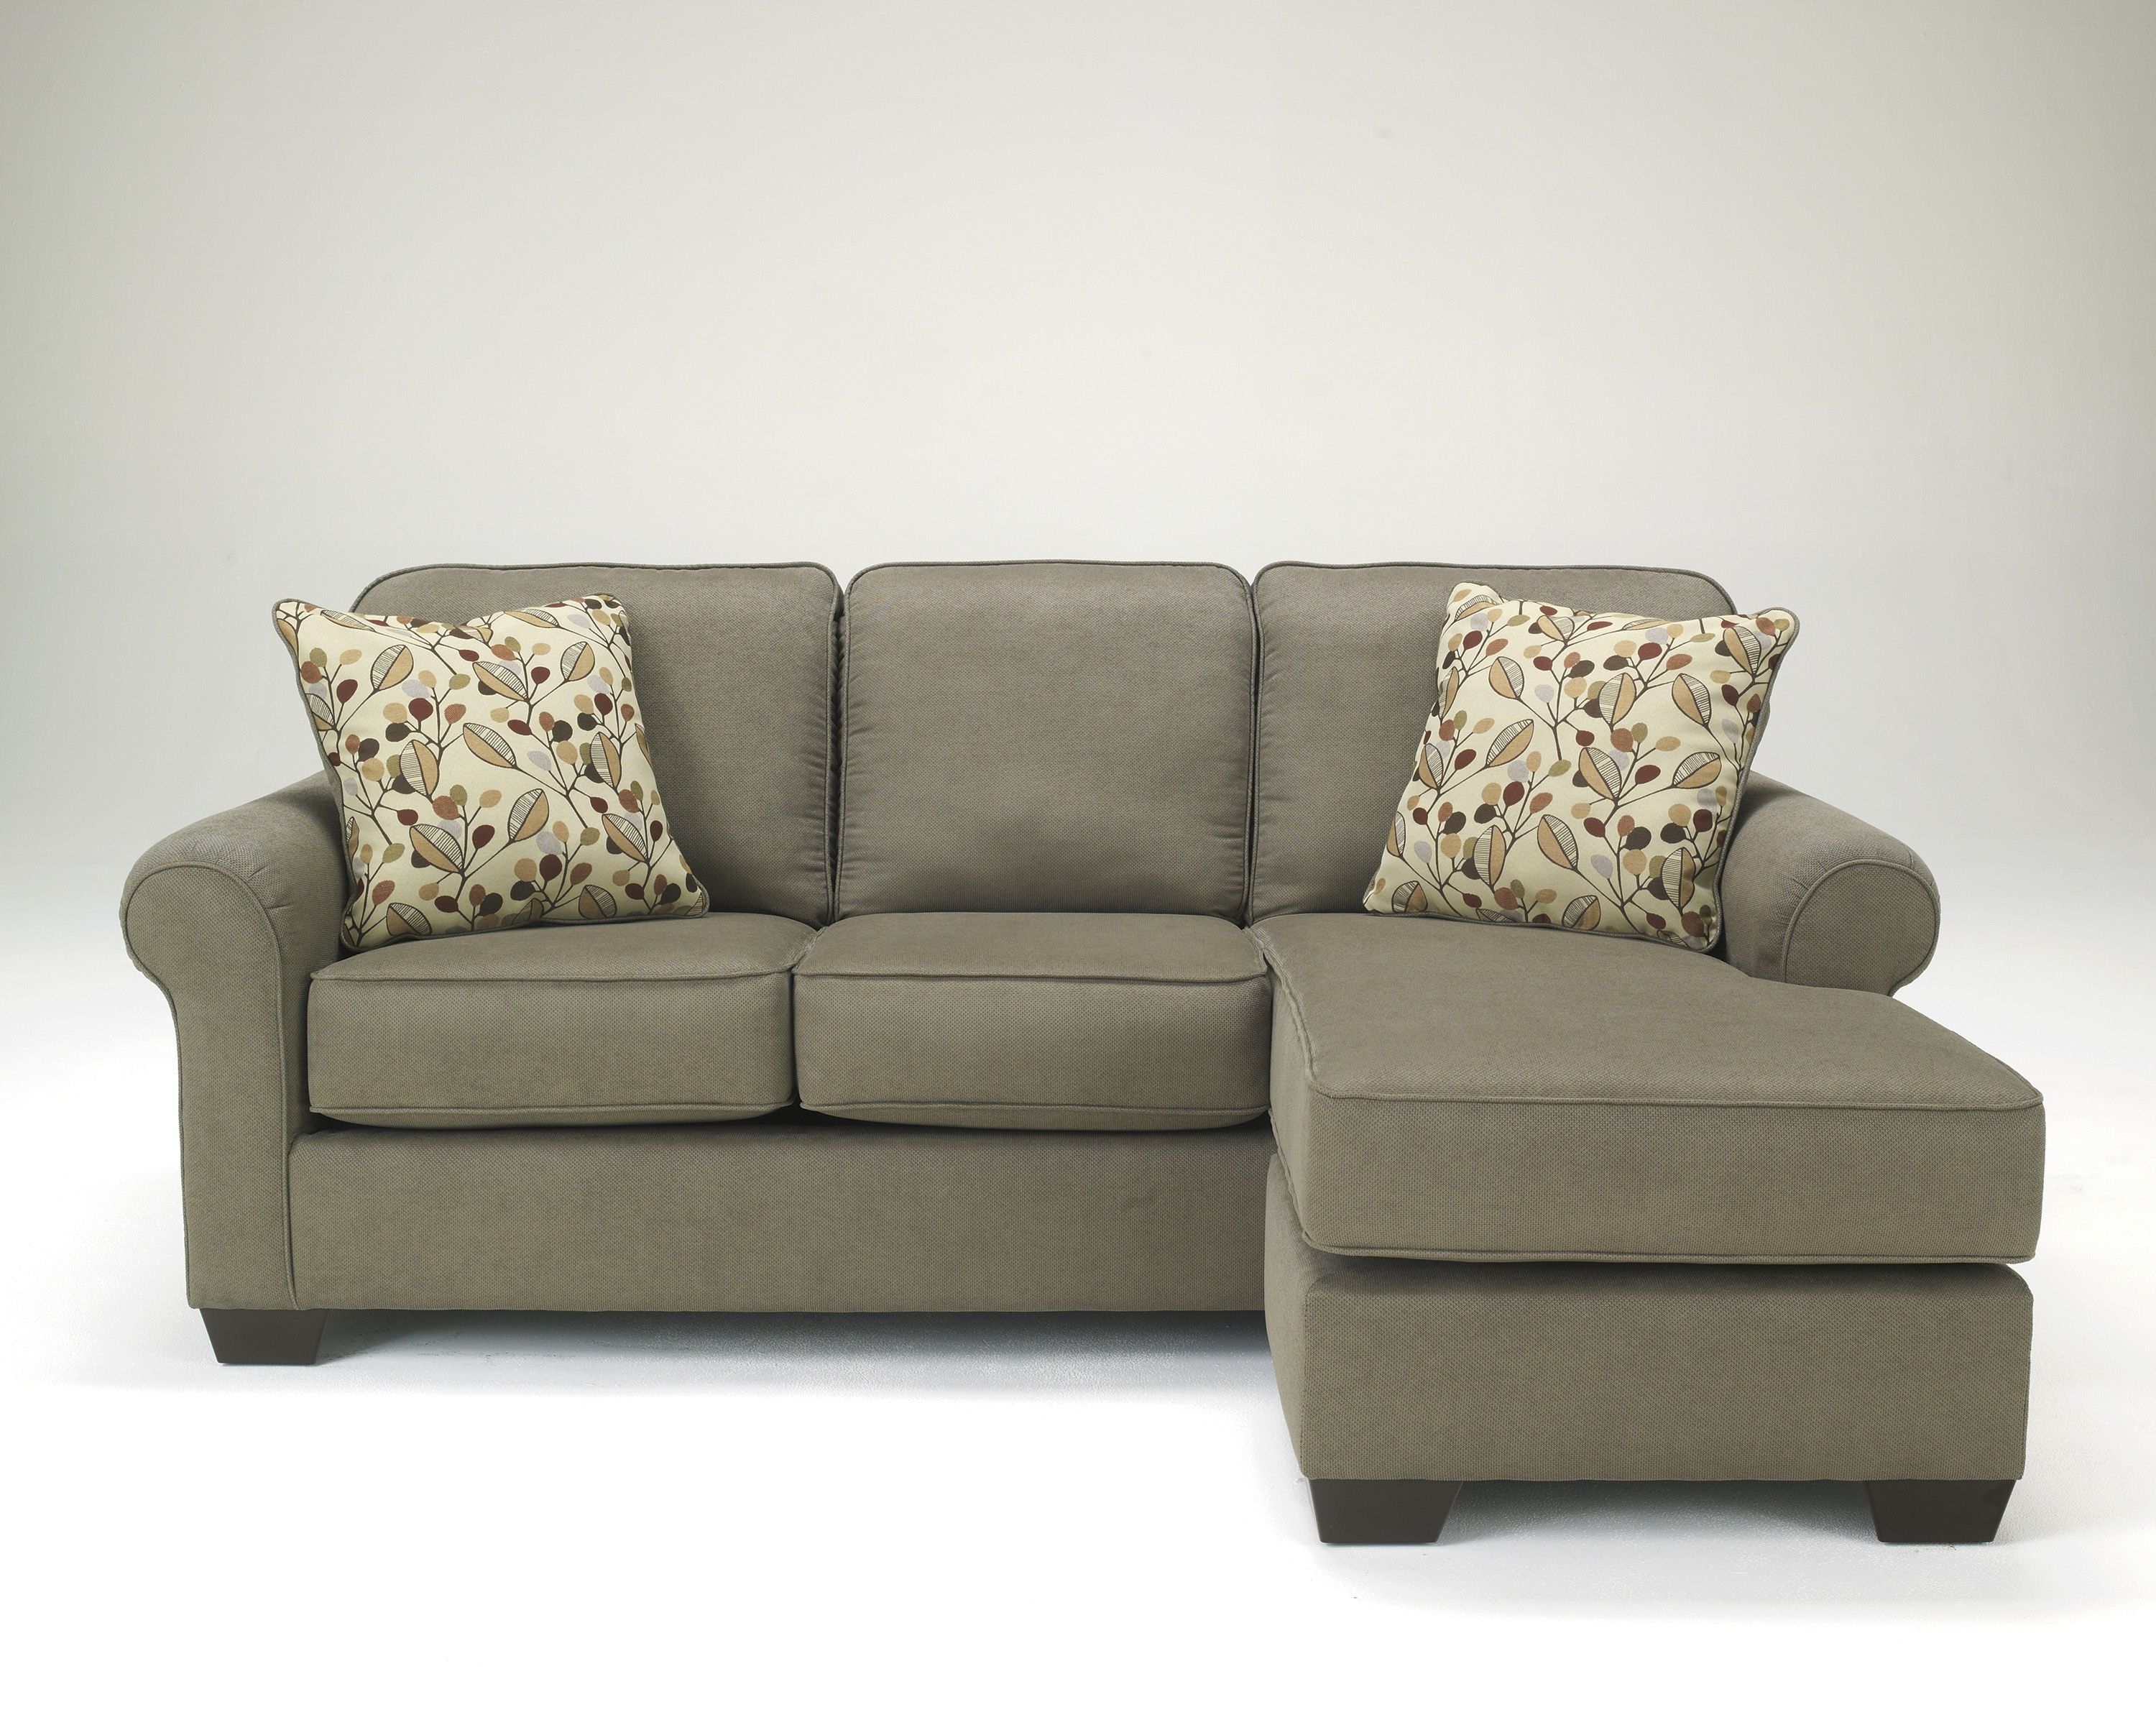 Chaise Lounge Sofa Ashley Furniture – Furniture Designs Throughout Popular Ashley Furniture Chaise Lounges (Photo 15 of 15)